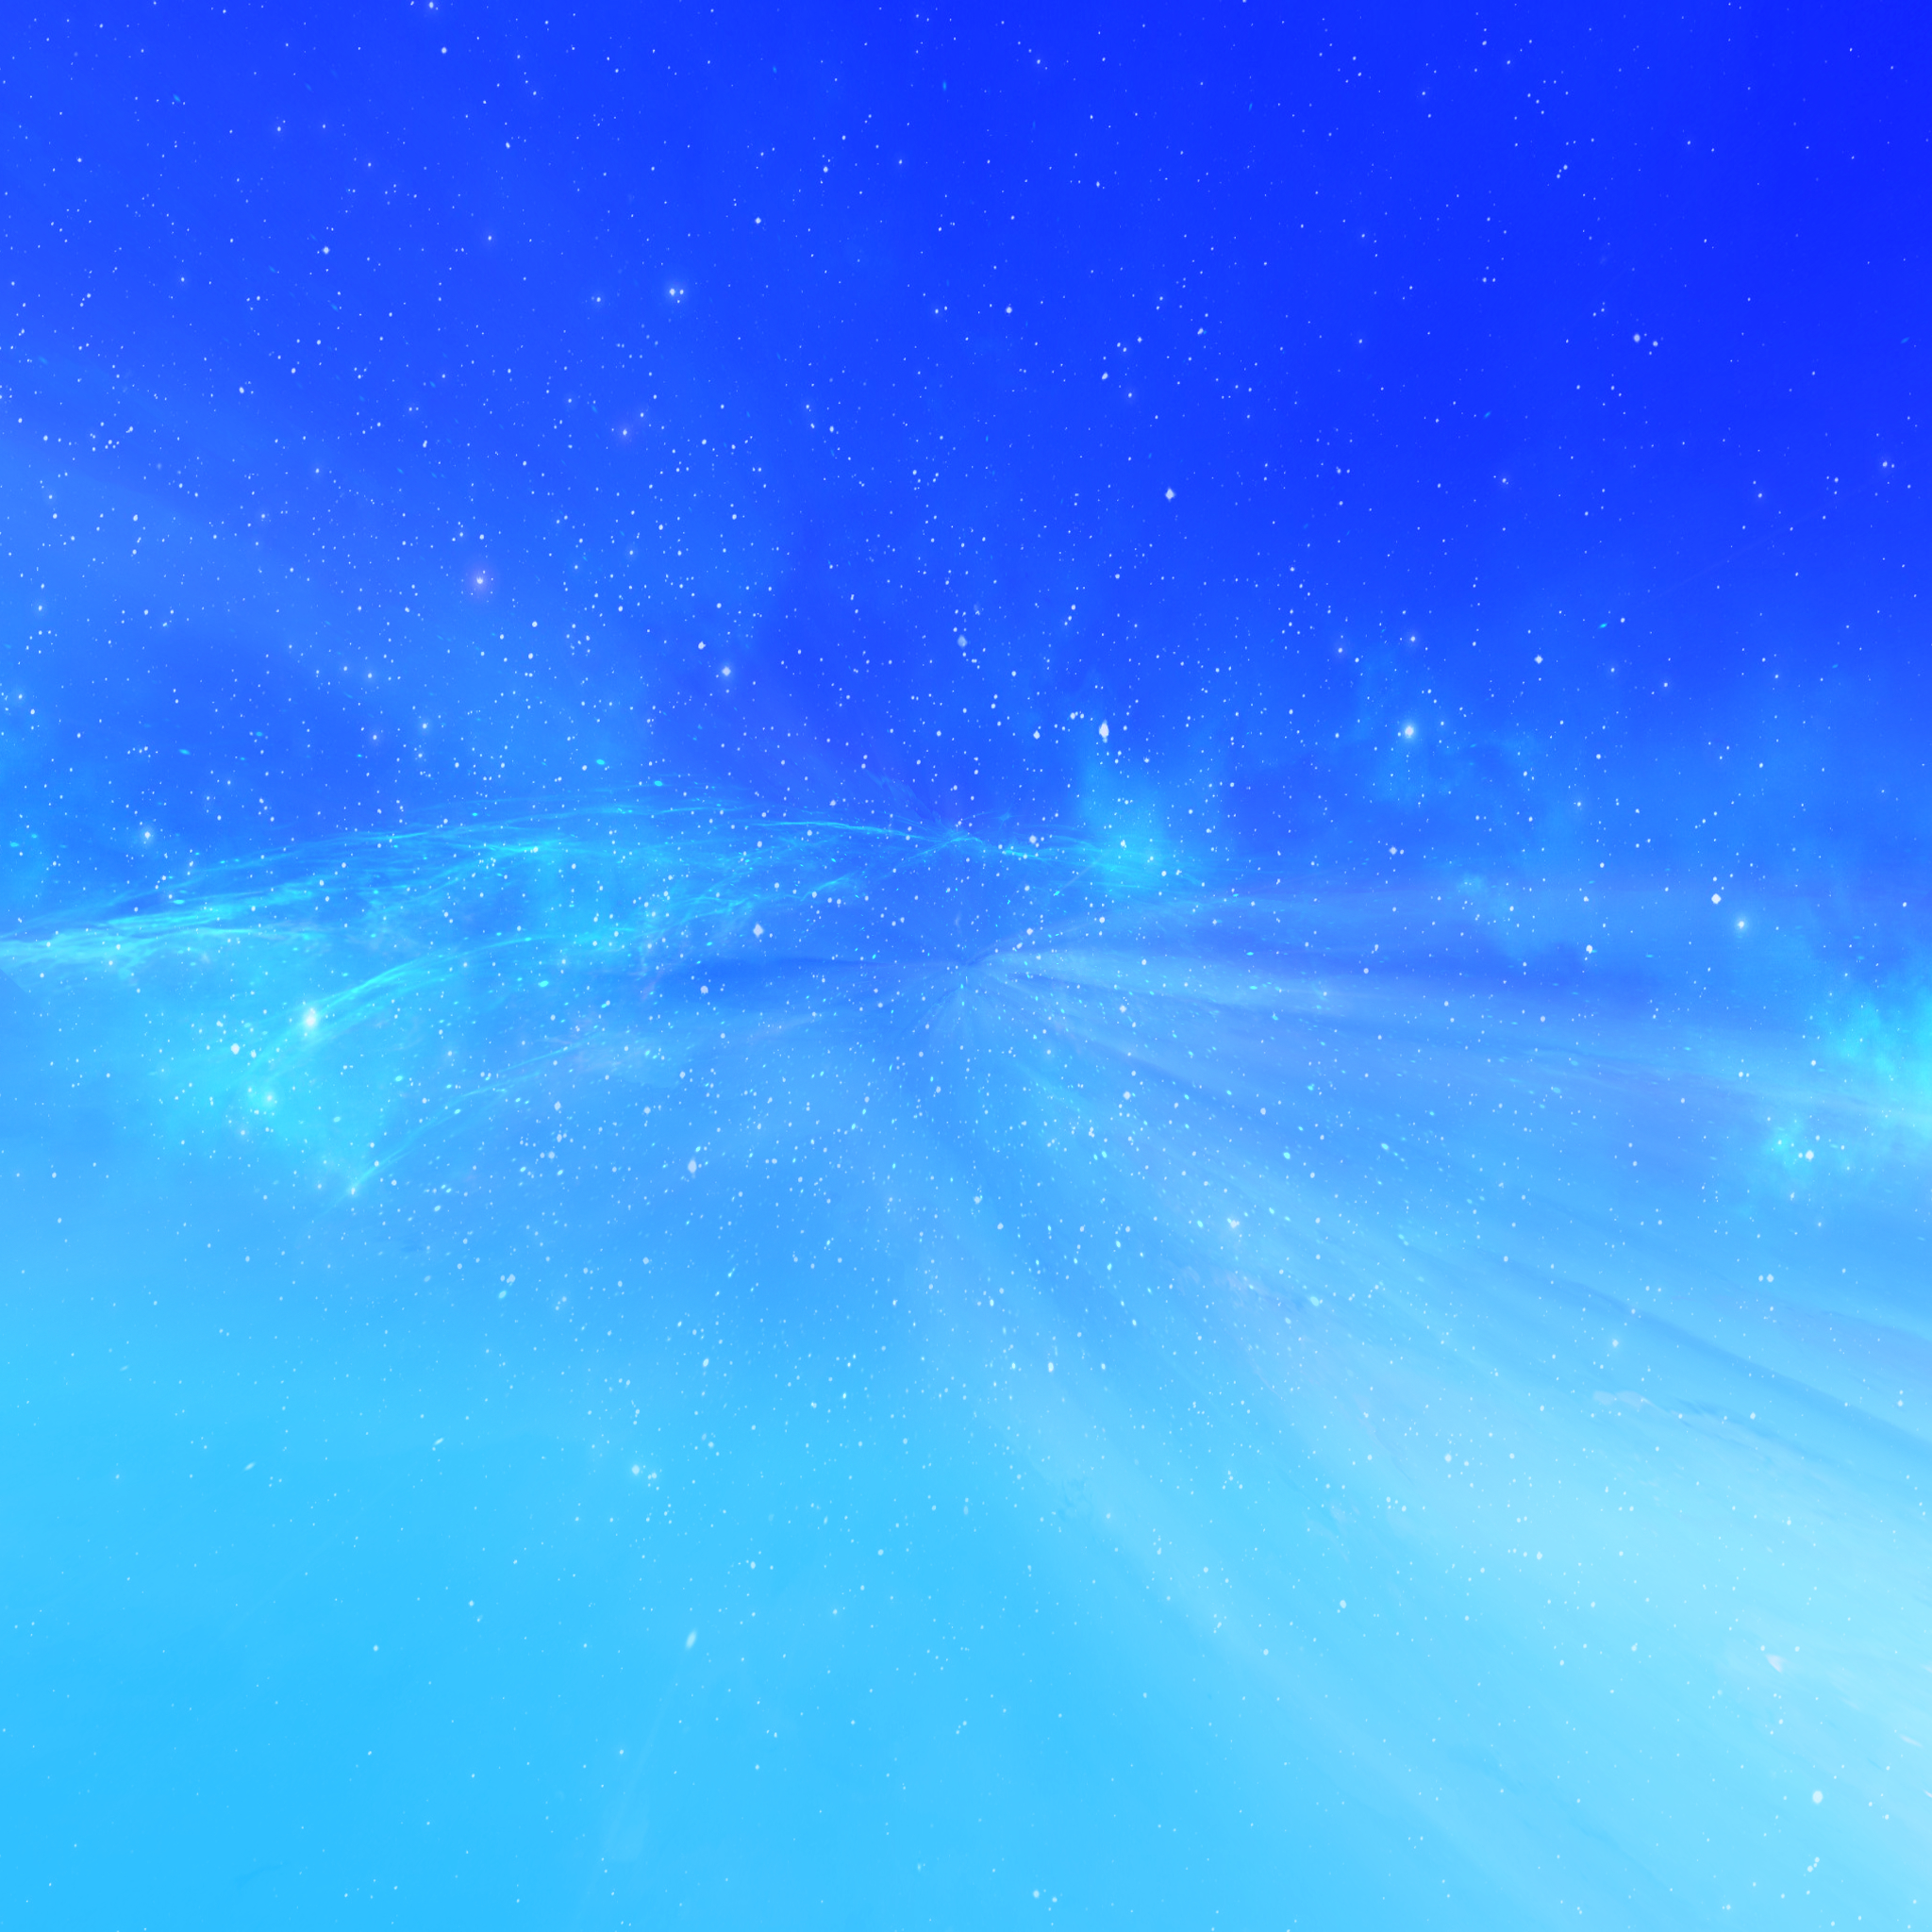 Wildly colored galactic hd wallpapers at ã resolution